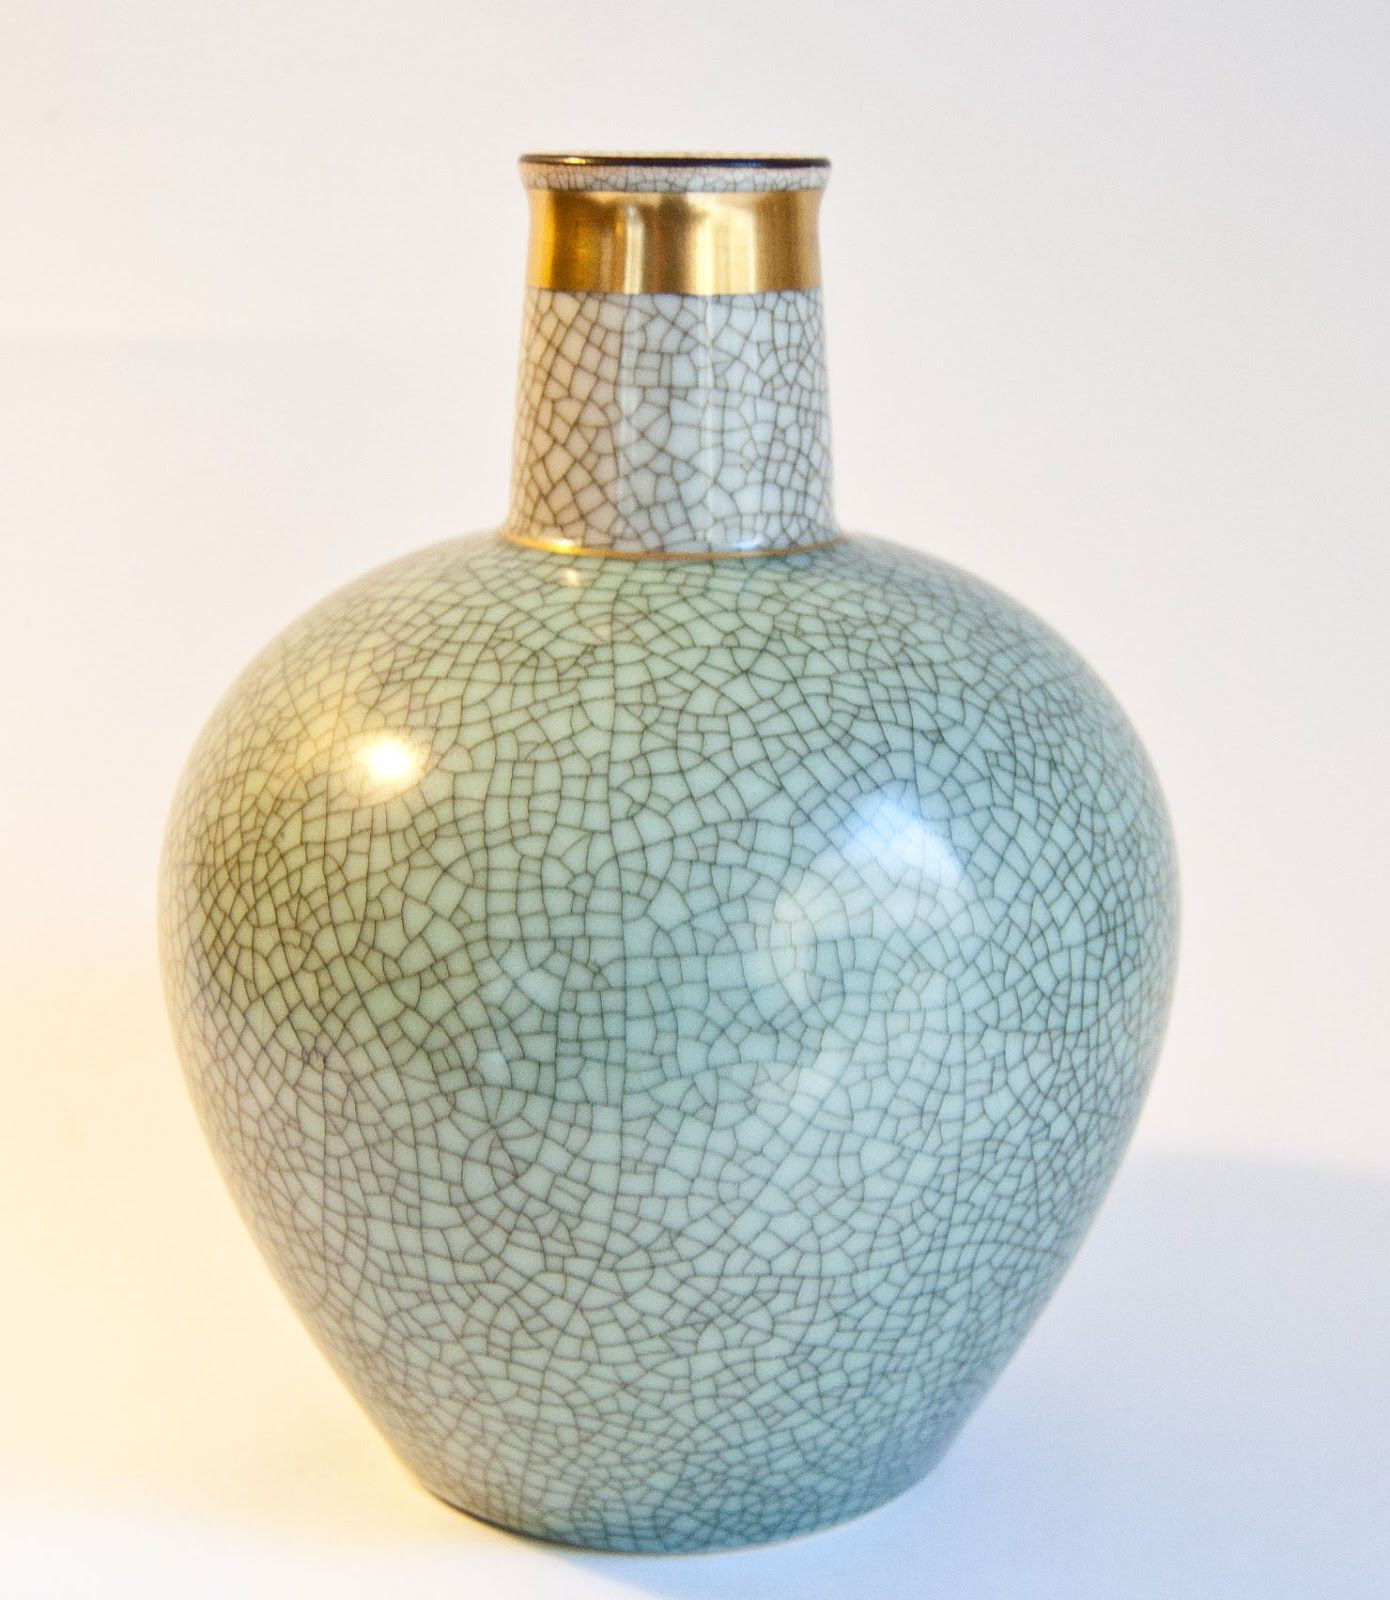 14 attractive Tiffany Tulip Vase Price 2024 free download tiffany tulip vase price of royal blue vases pics ac2a2ec29ce280a0 dale tiffany art glass vase aqua royal inside royal blue vases image royal copenhagen crackle ware what the blue lamp was m